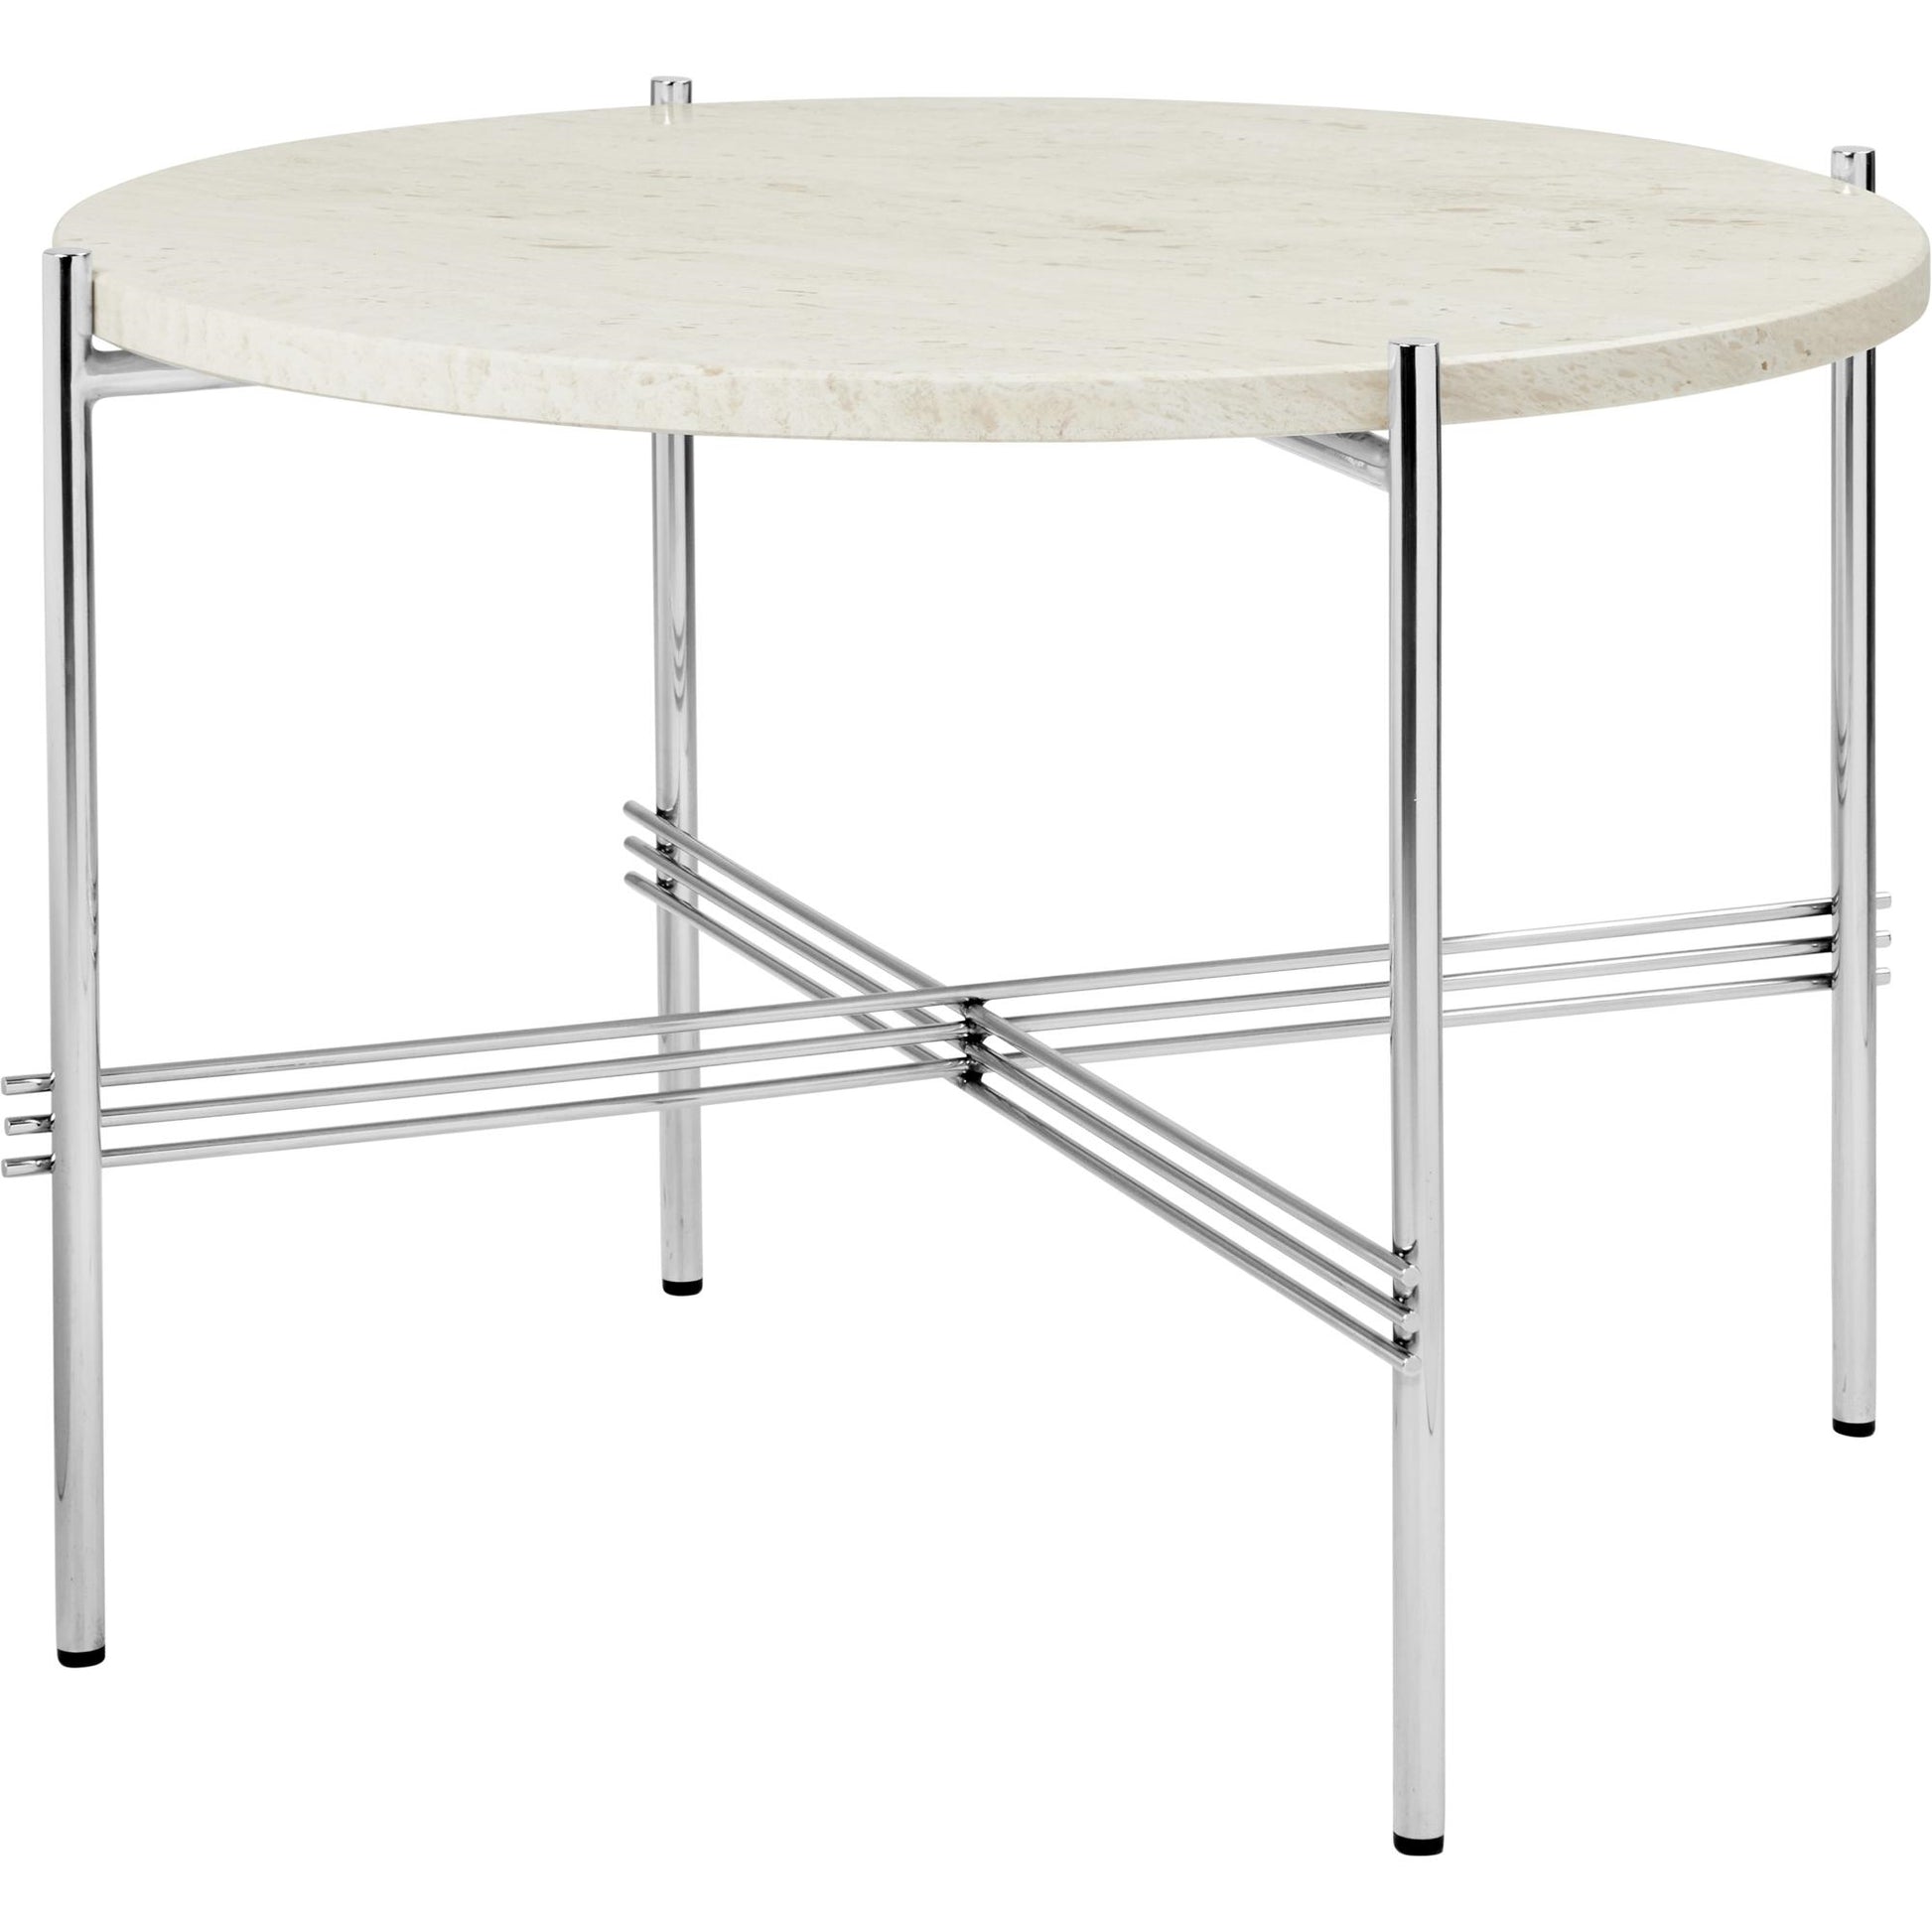 TS Coffee Table Round Ø55 by GUBI #Polished Steel/White Travertine